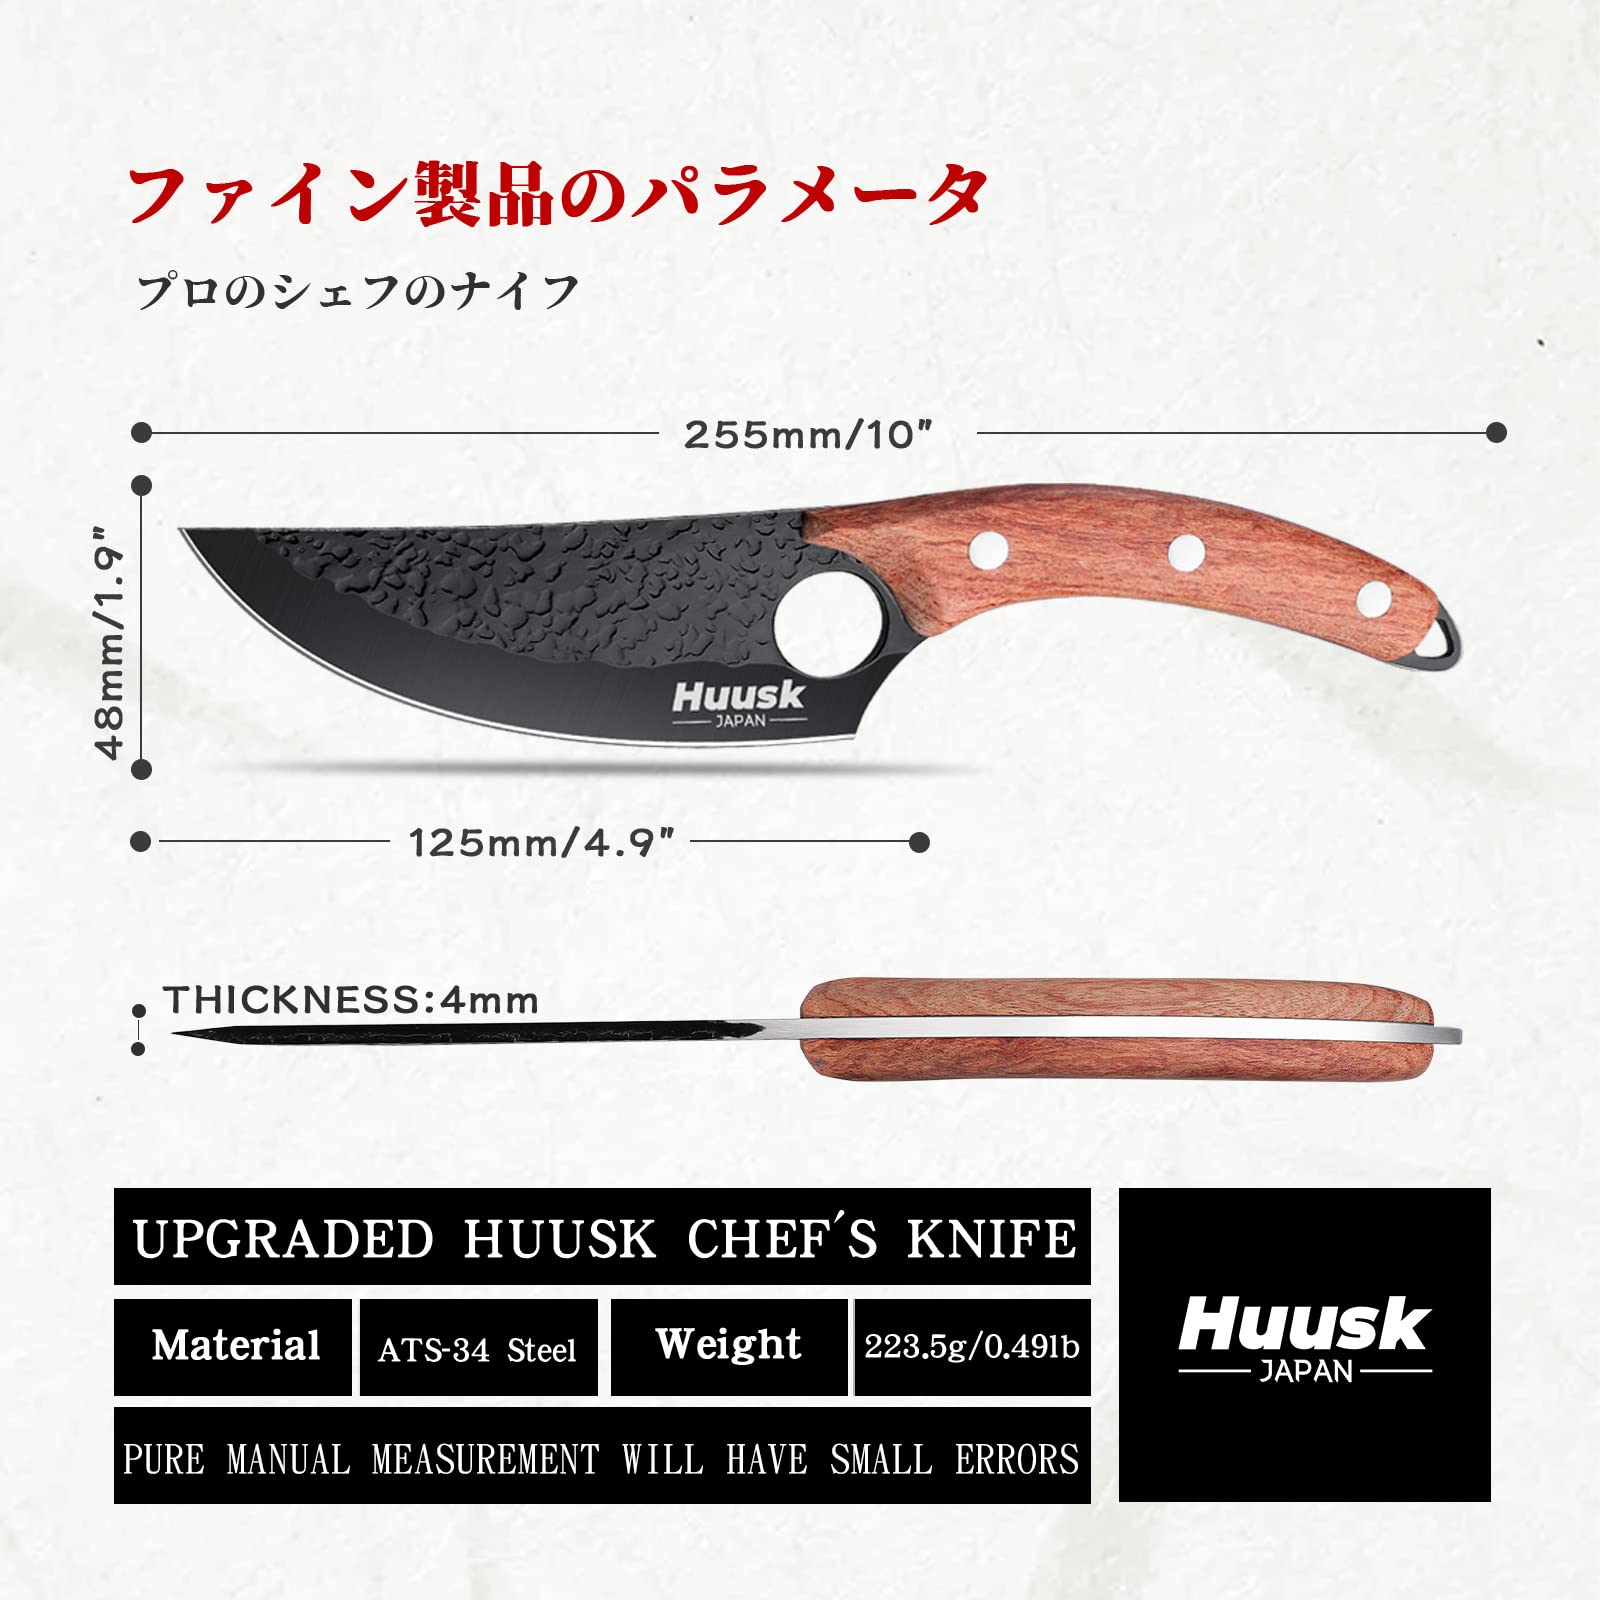 Huusk Upgraded Knife Japan Kitchen Caveman Knife Bundle with AUS 8 Stainless Steel Japanese Chef Knife